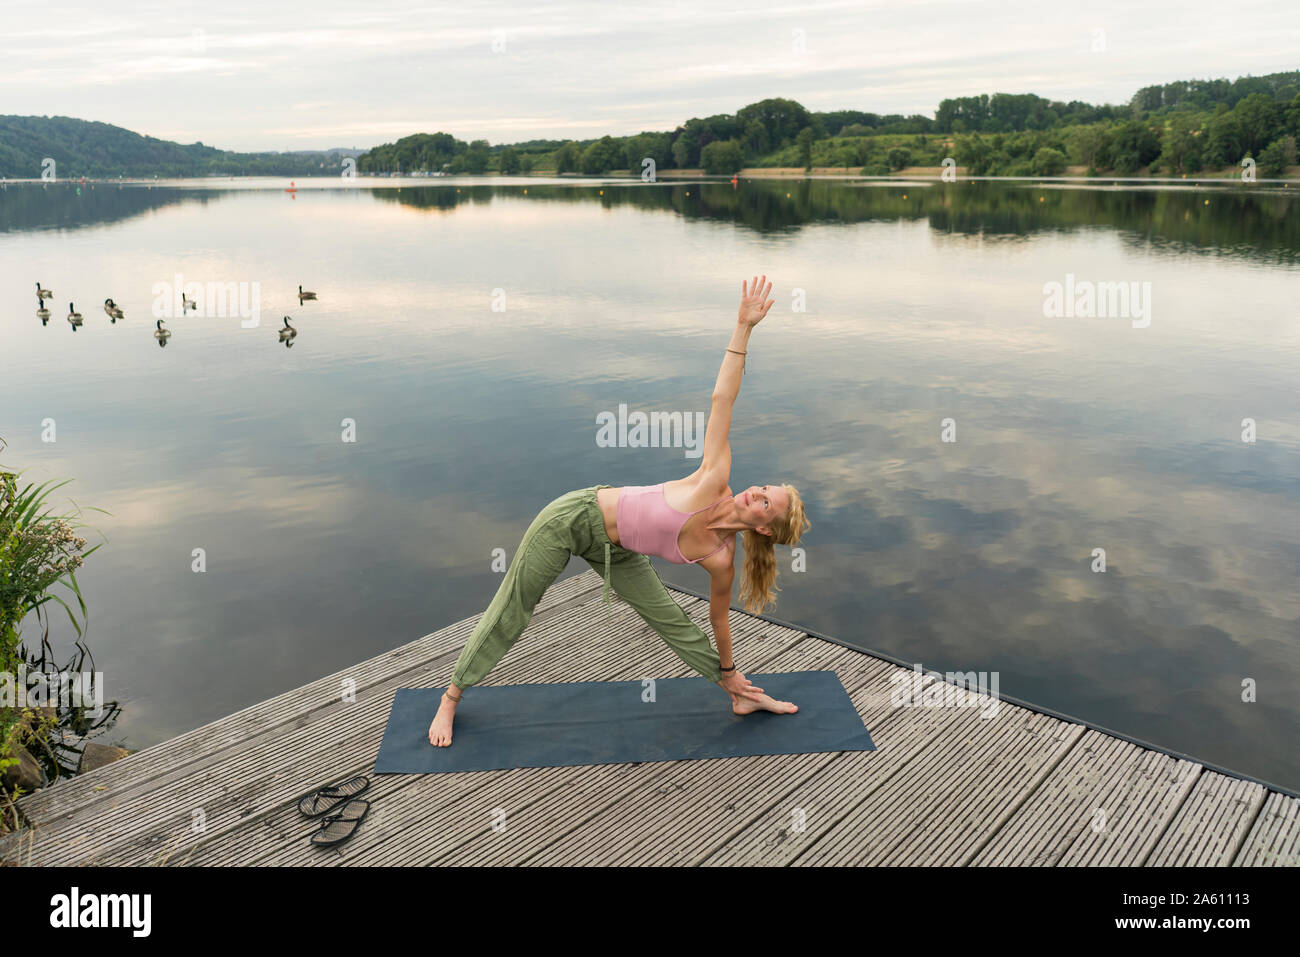 Young woman doing gymnastics on a jetty at a lake Stock Photo